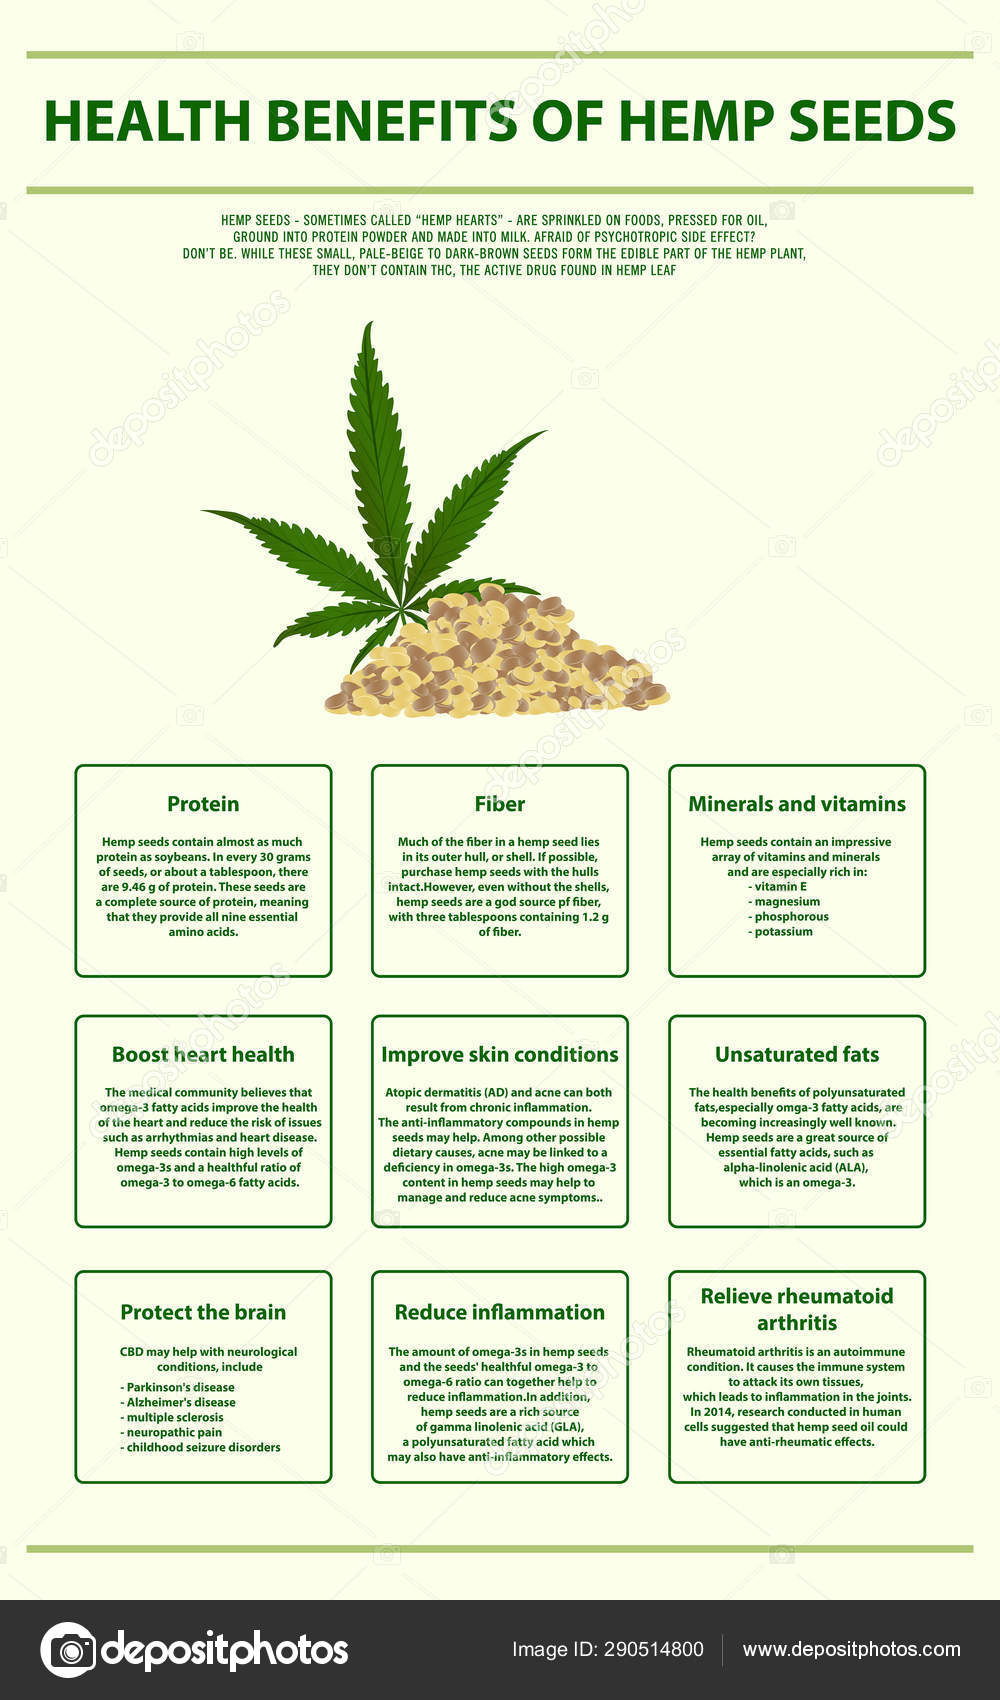 What Are the Health Benefits of Hemp Seeds?